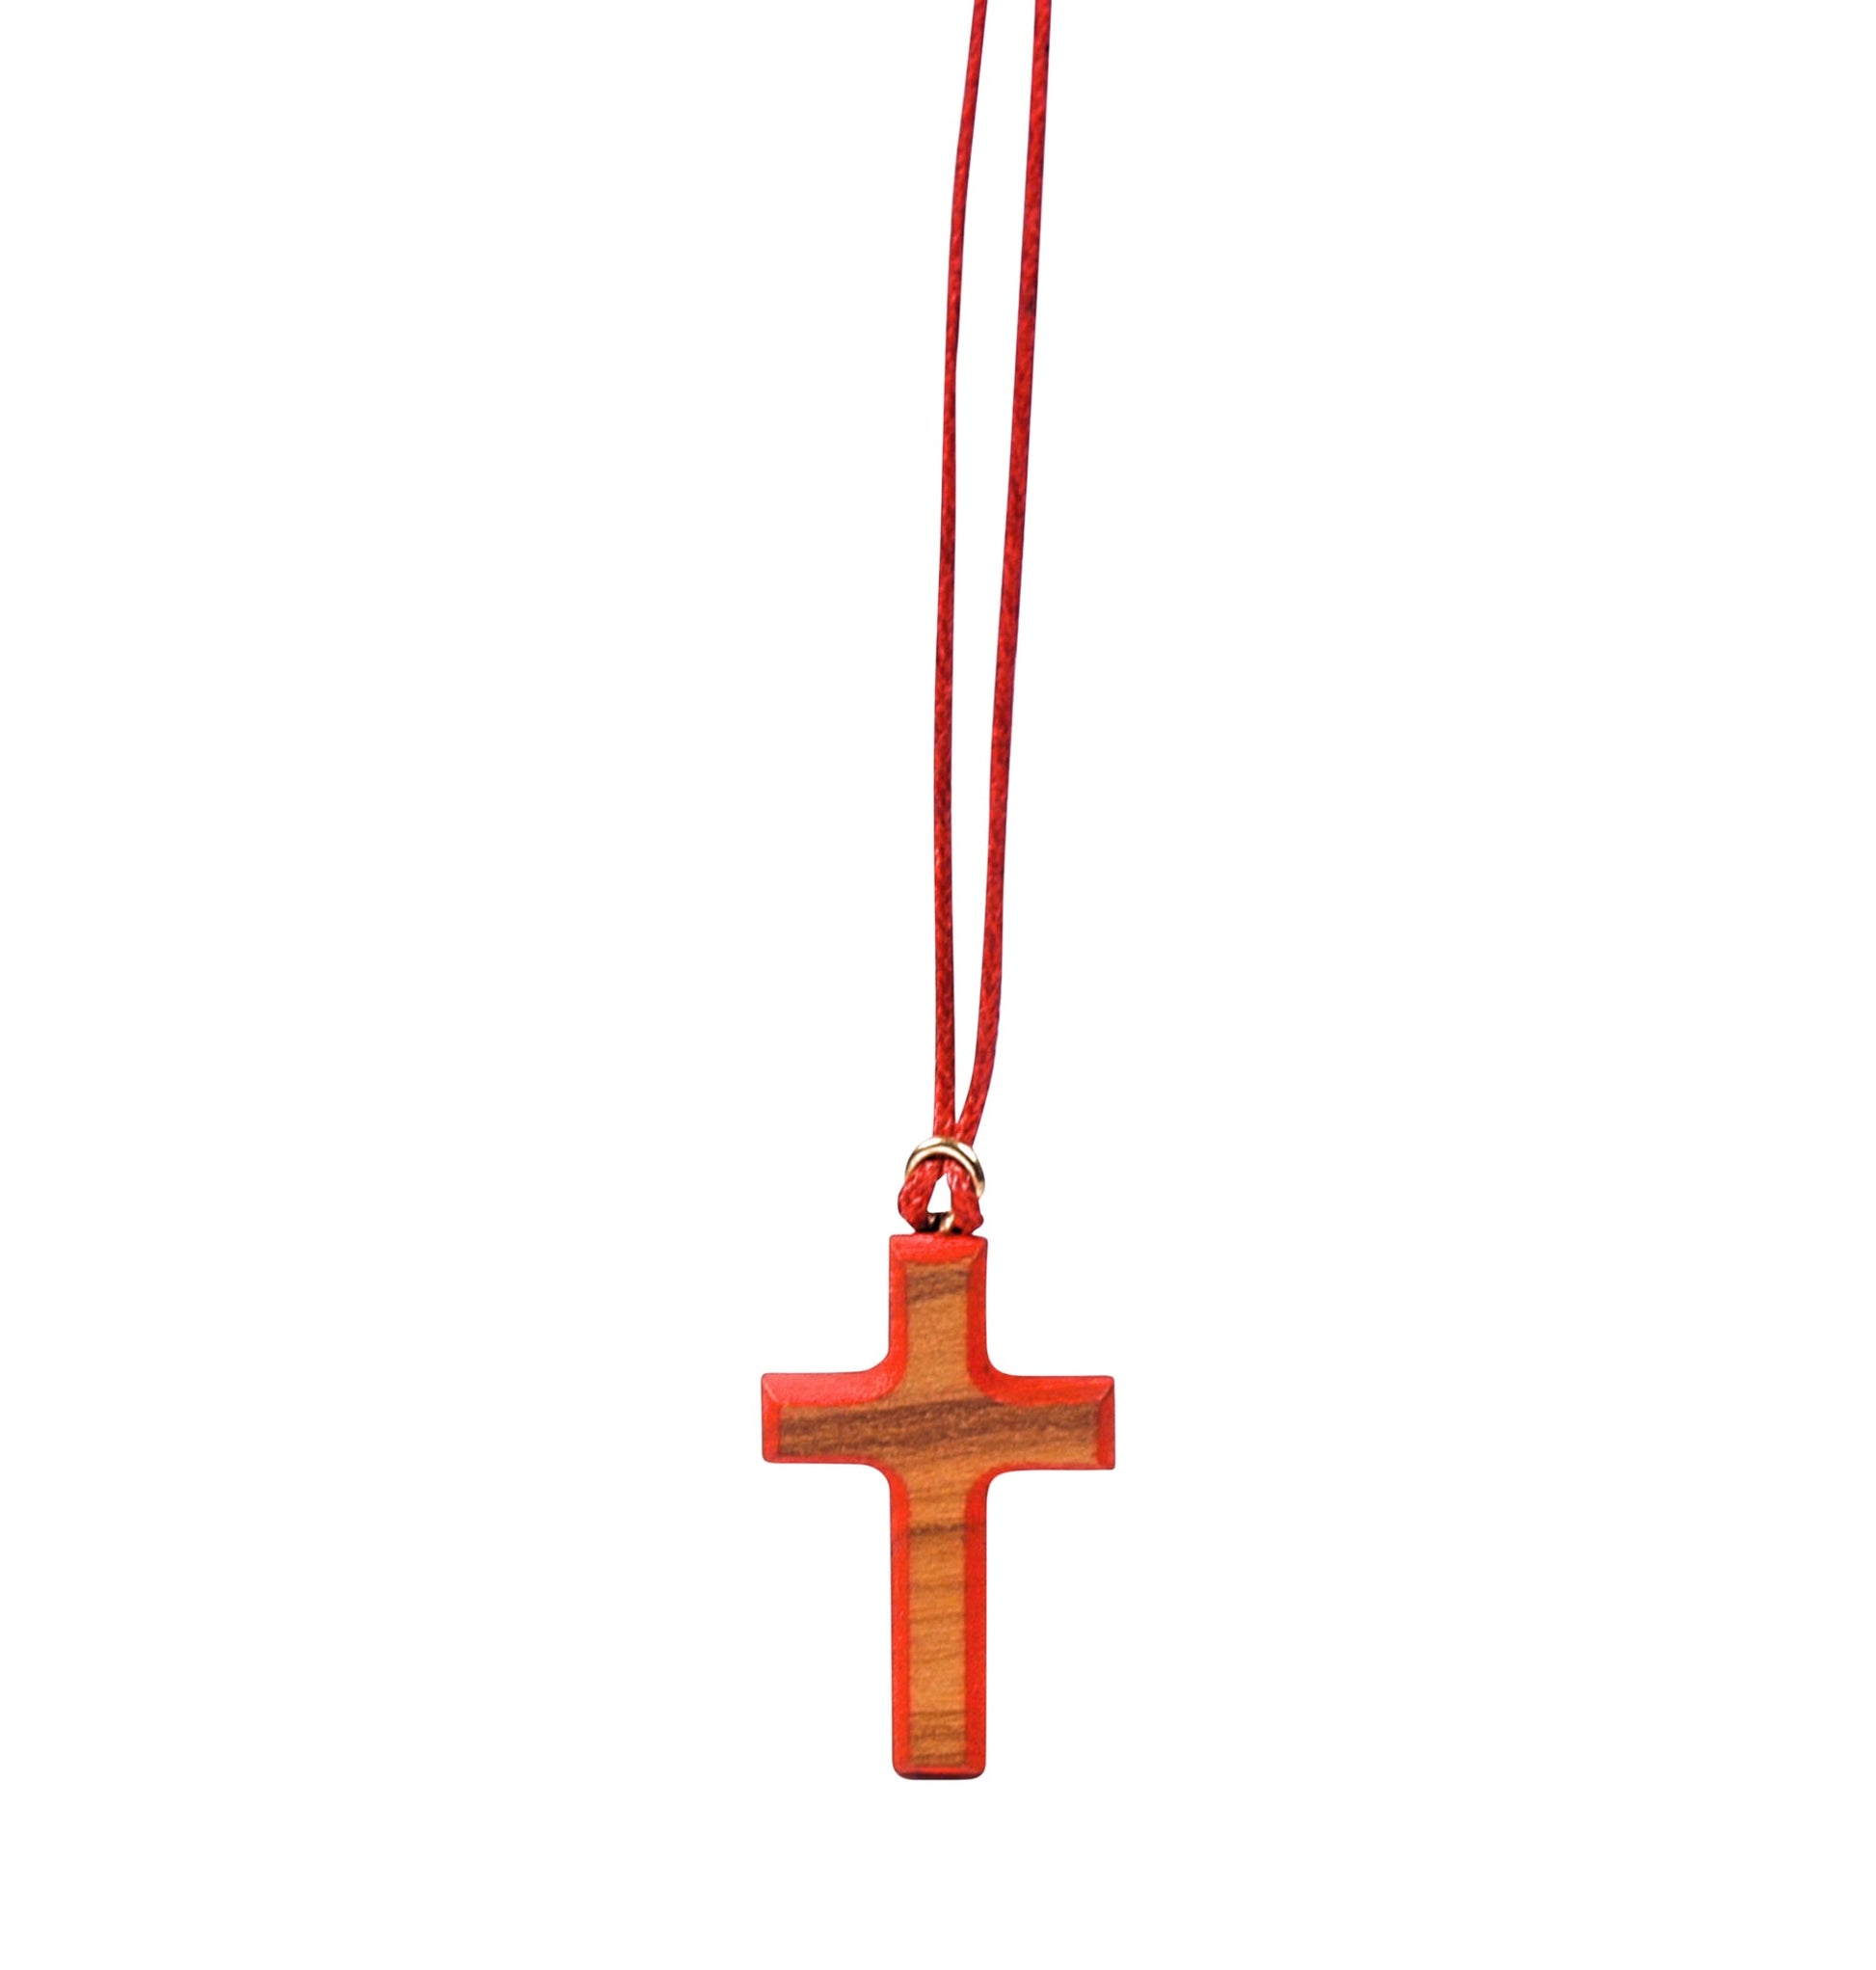 Wooden cross pendant with colored painted edges, suspended from a matching colored cord.